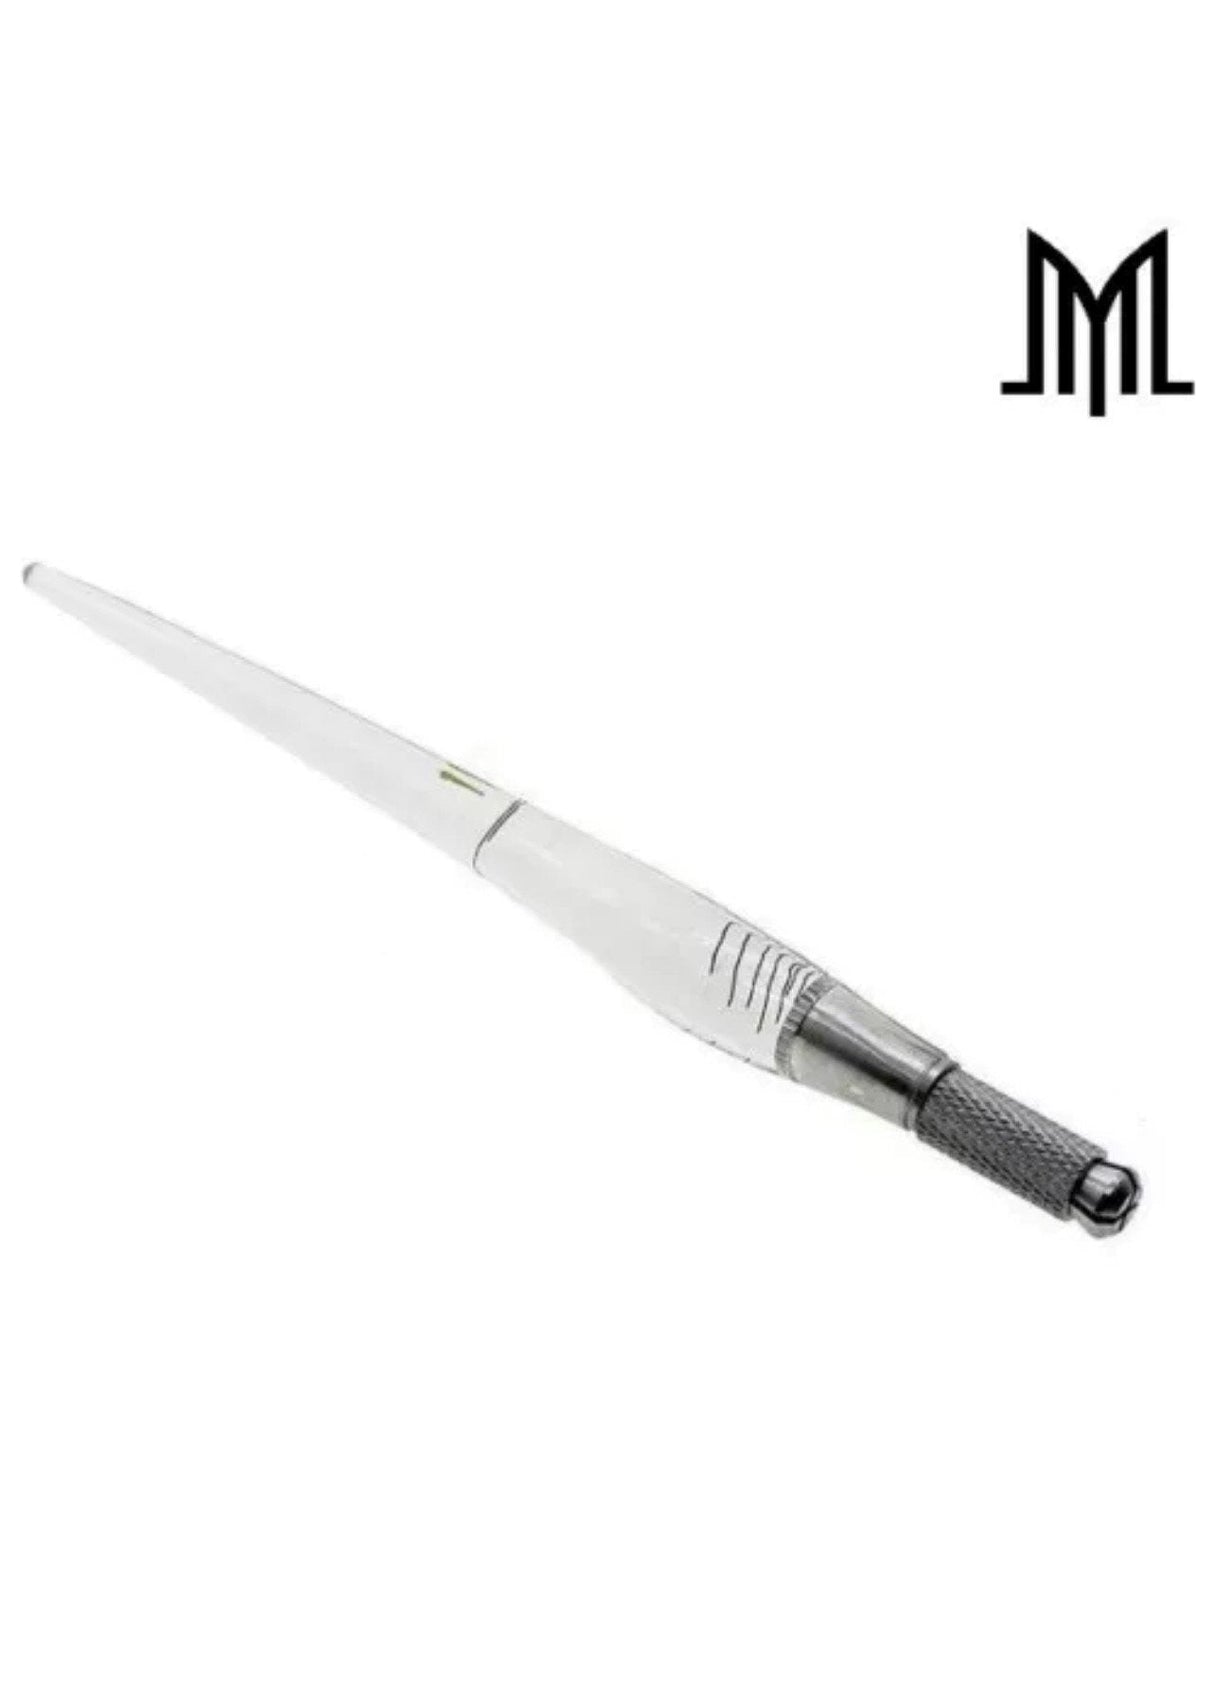 SHAPED MICRFOBLADING PEN